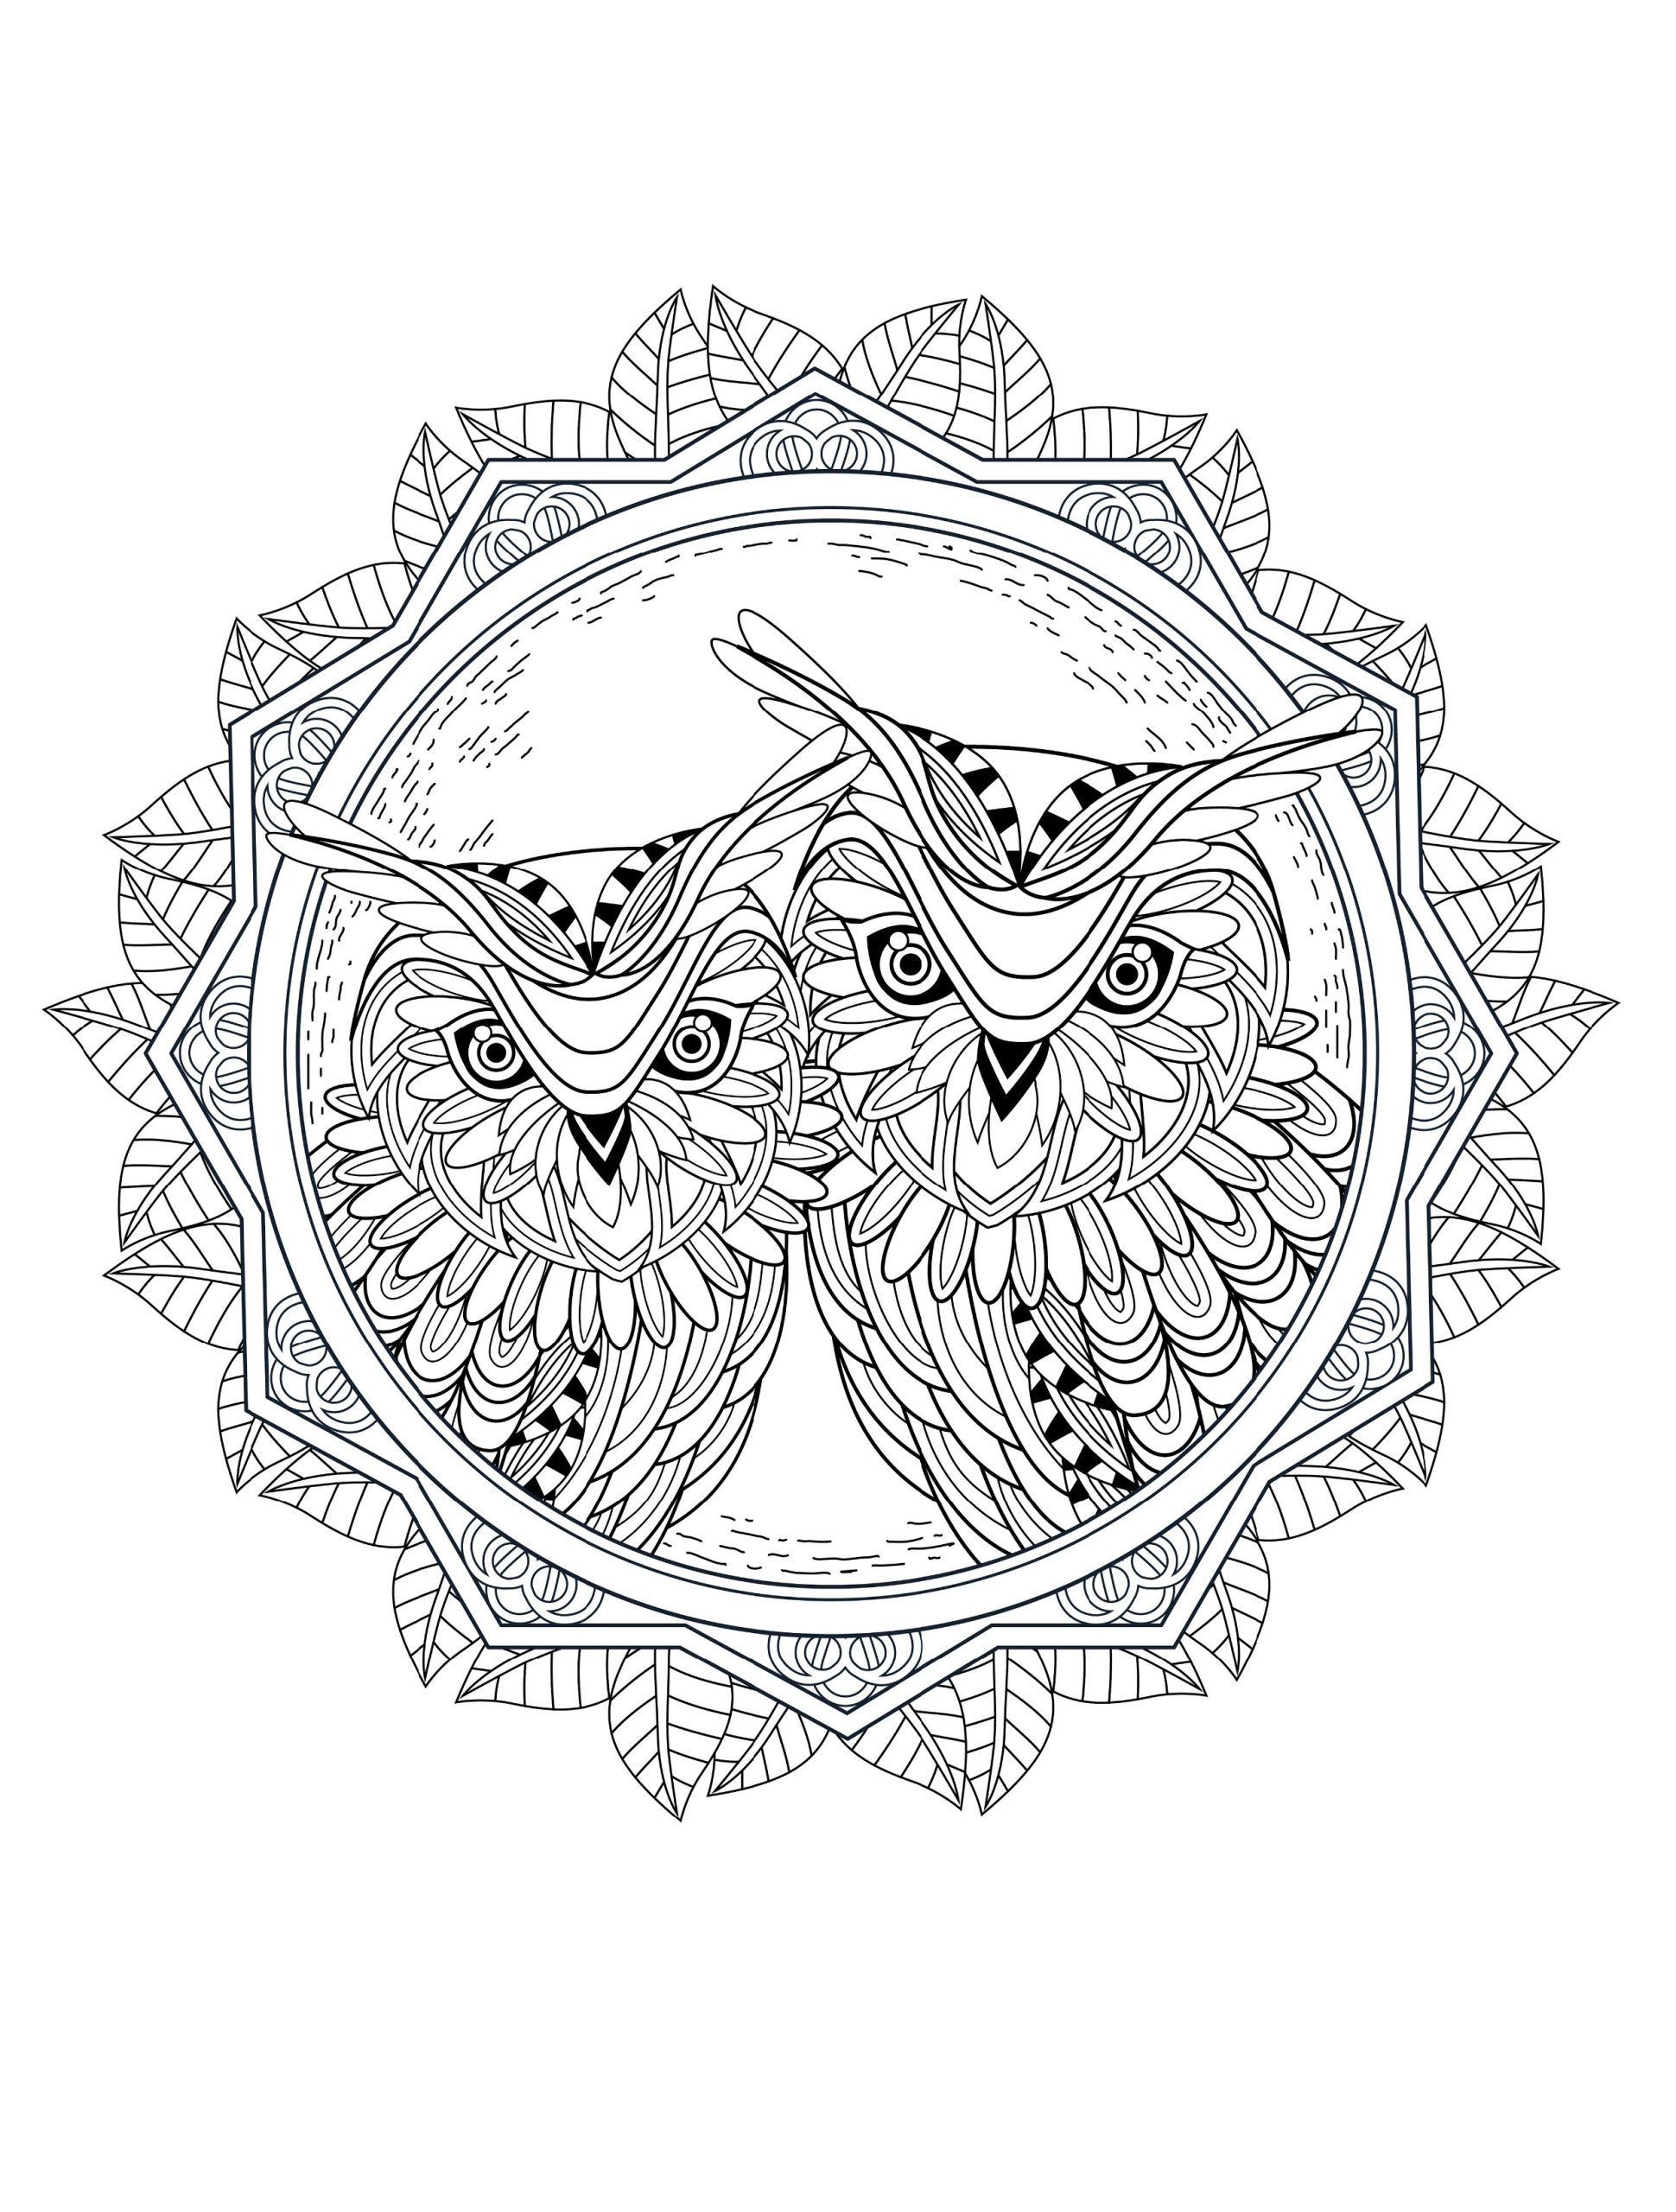 Coloring Pages To Print For Adults Owl